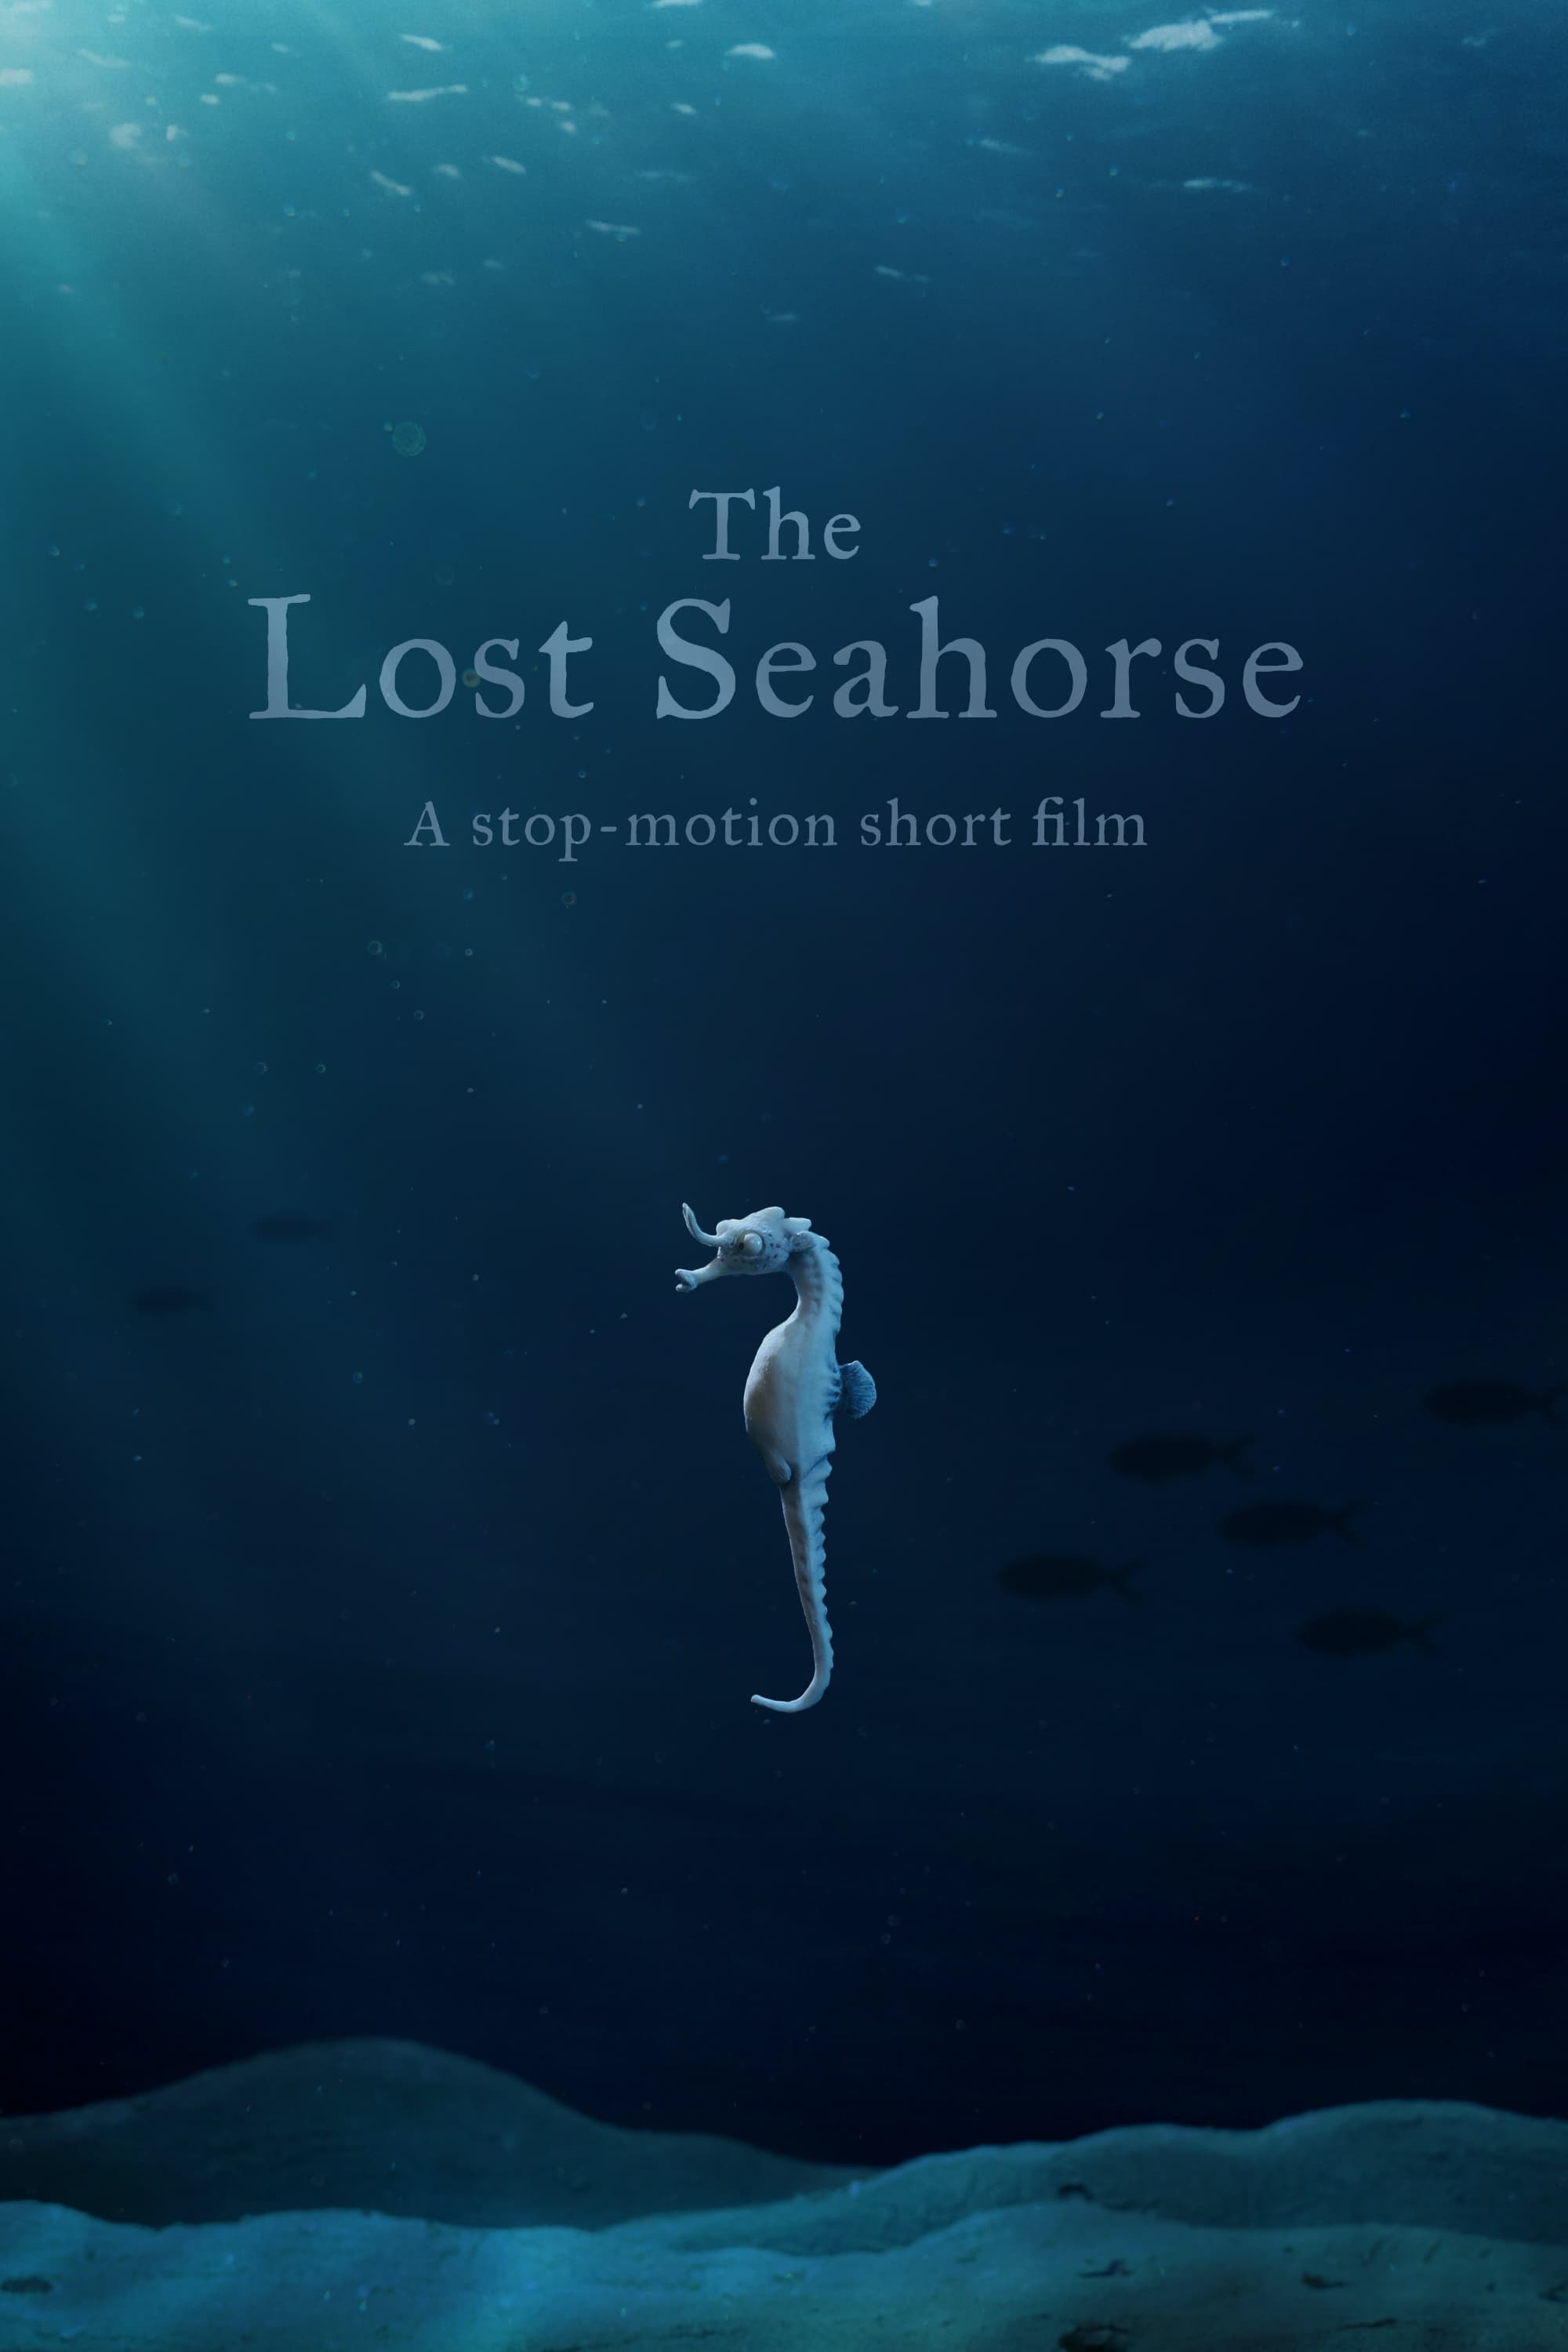 The Lost Seahorse